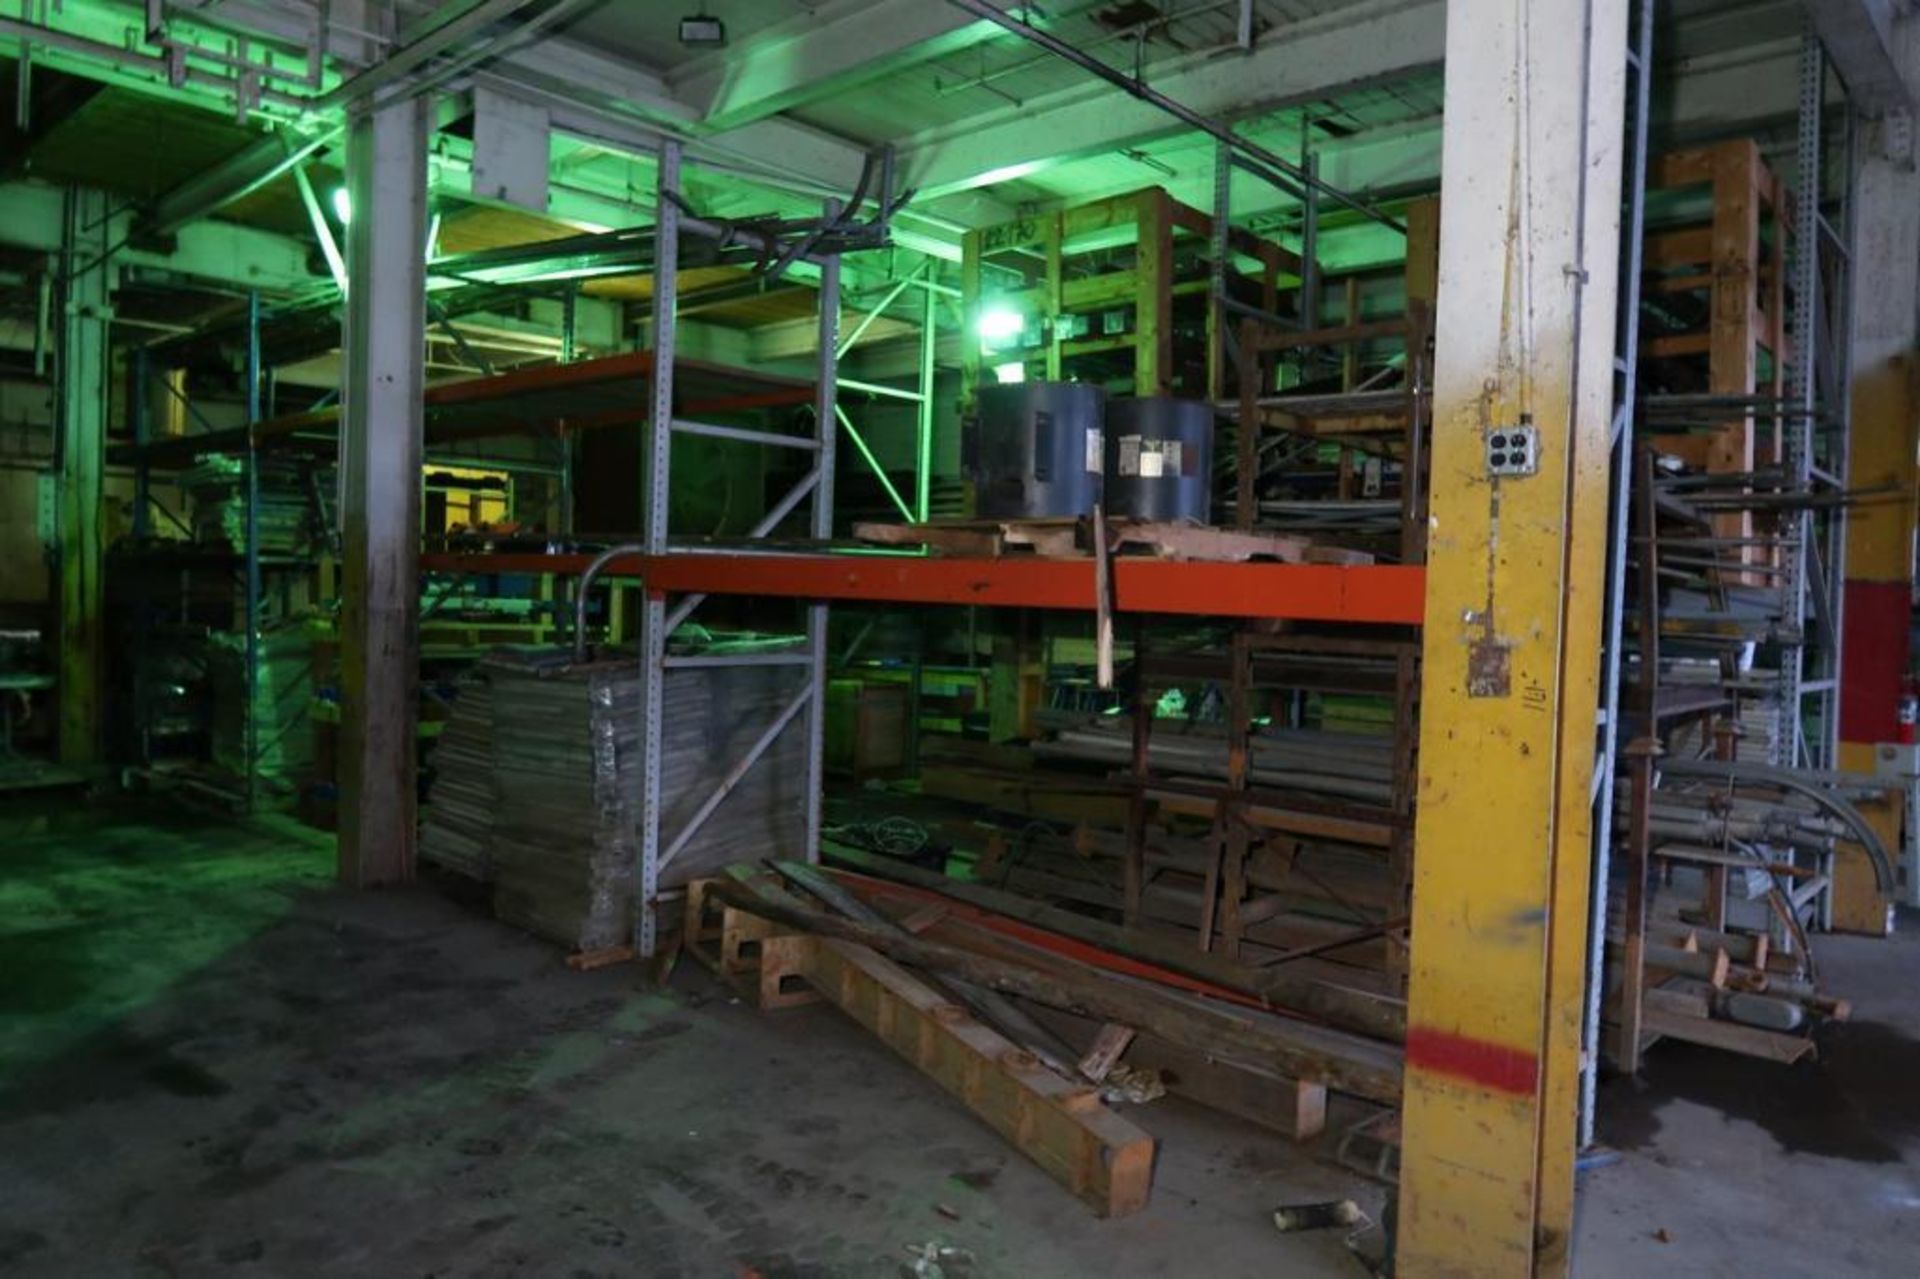 Contents of Maintenance Shop Storage Area - Image 15 of 38